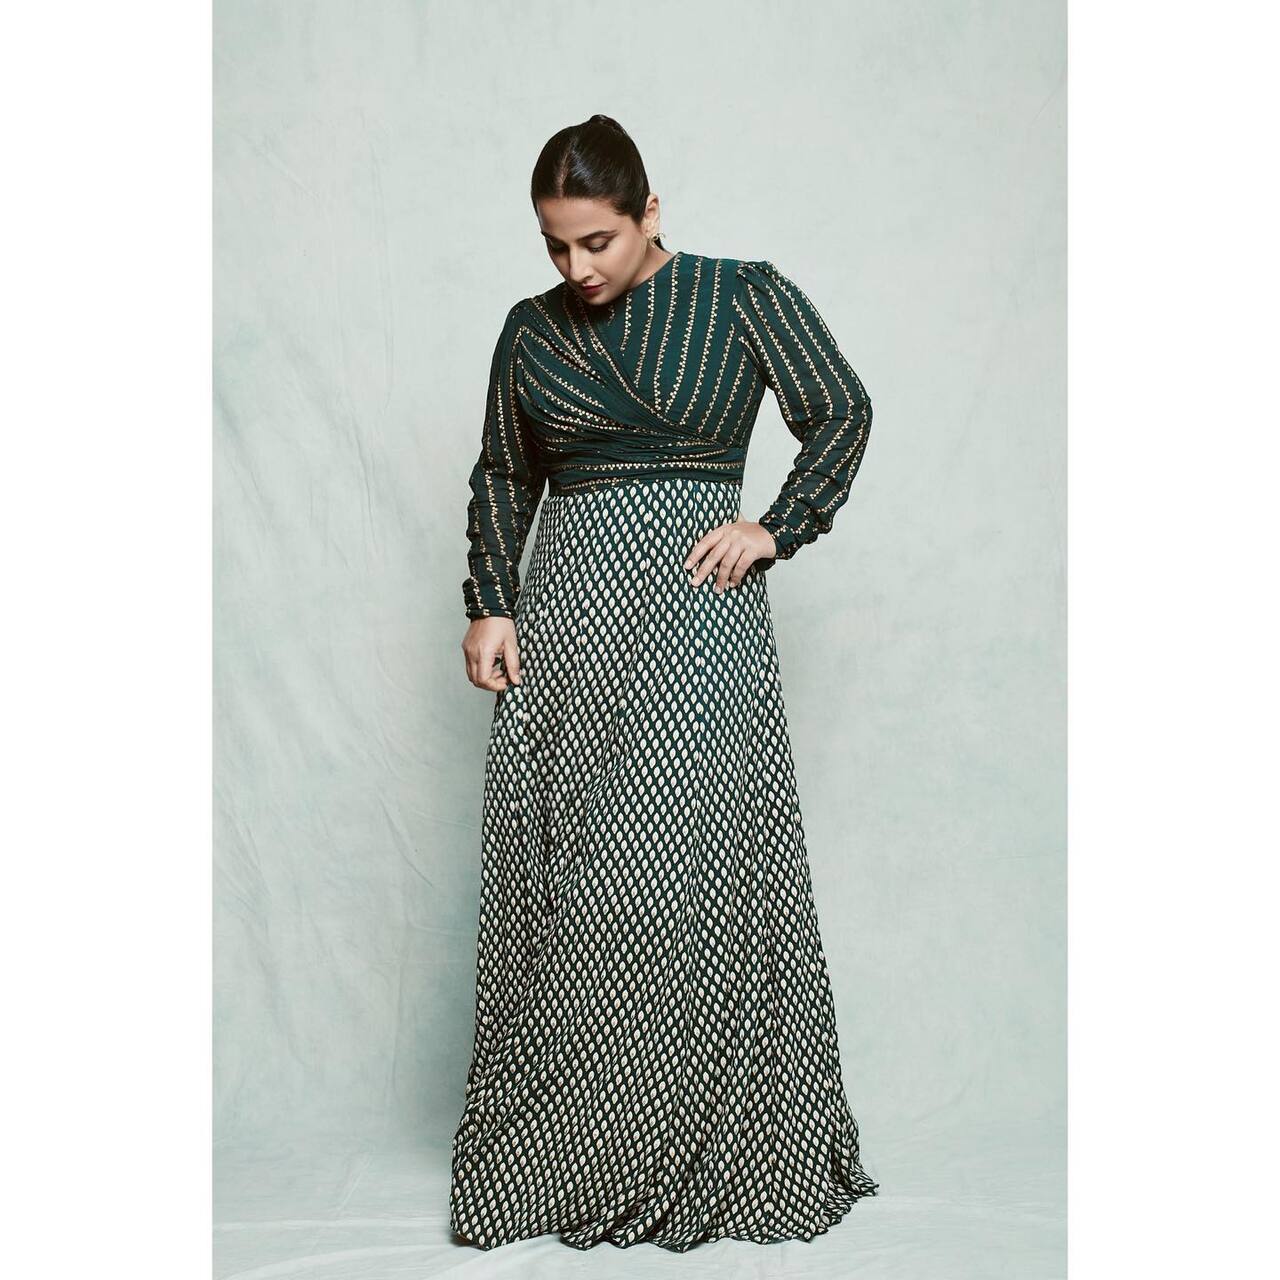 Anarkalis are another great option for celebrating Teej - they allow you to move around freely and look glamorous at the same time! Vidya Balan iss timeless in he teal green printed anarkali. The outfit is from the shelves of the clothing brand Bhumika Sharma